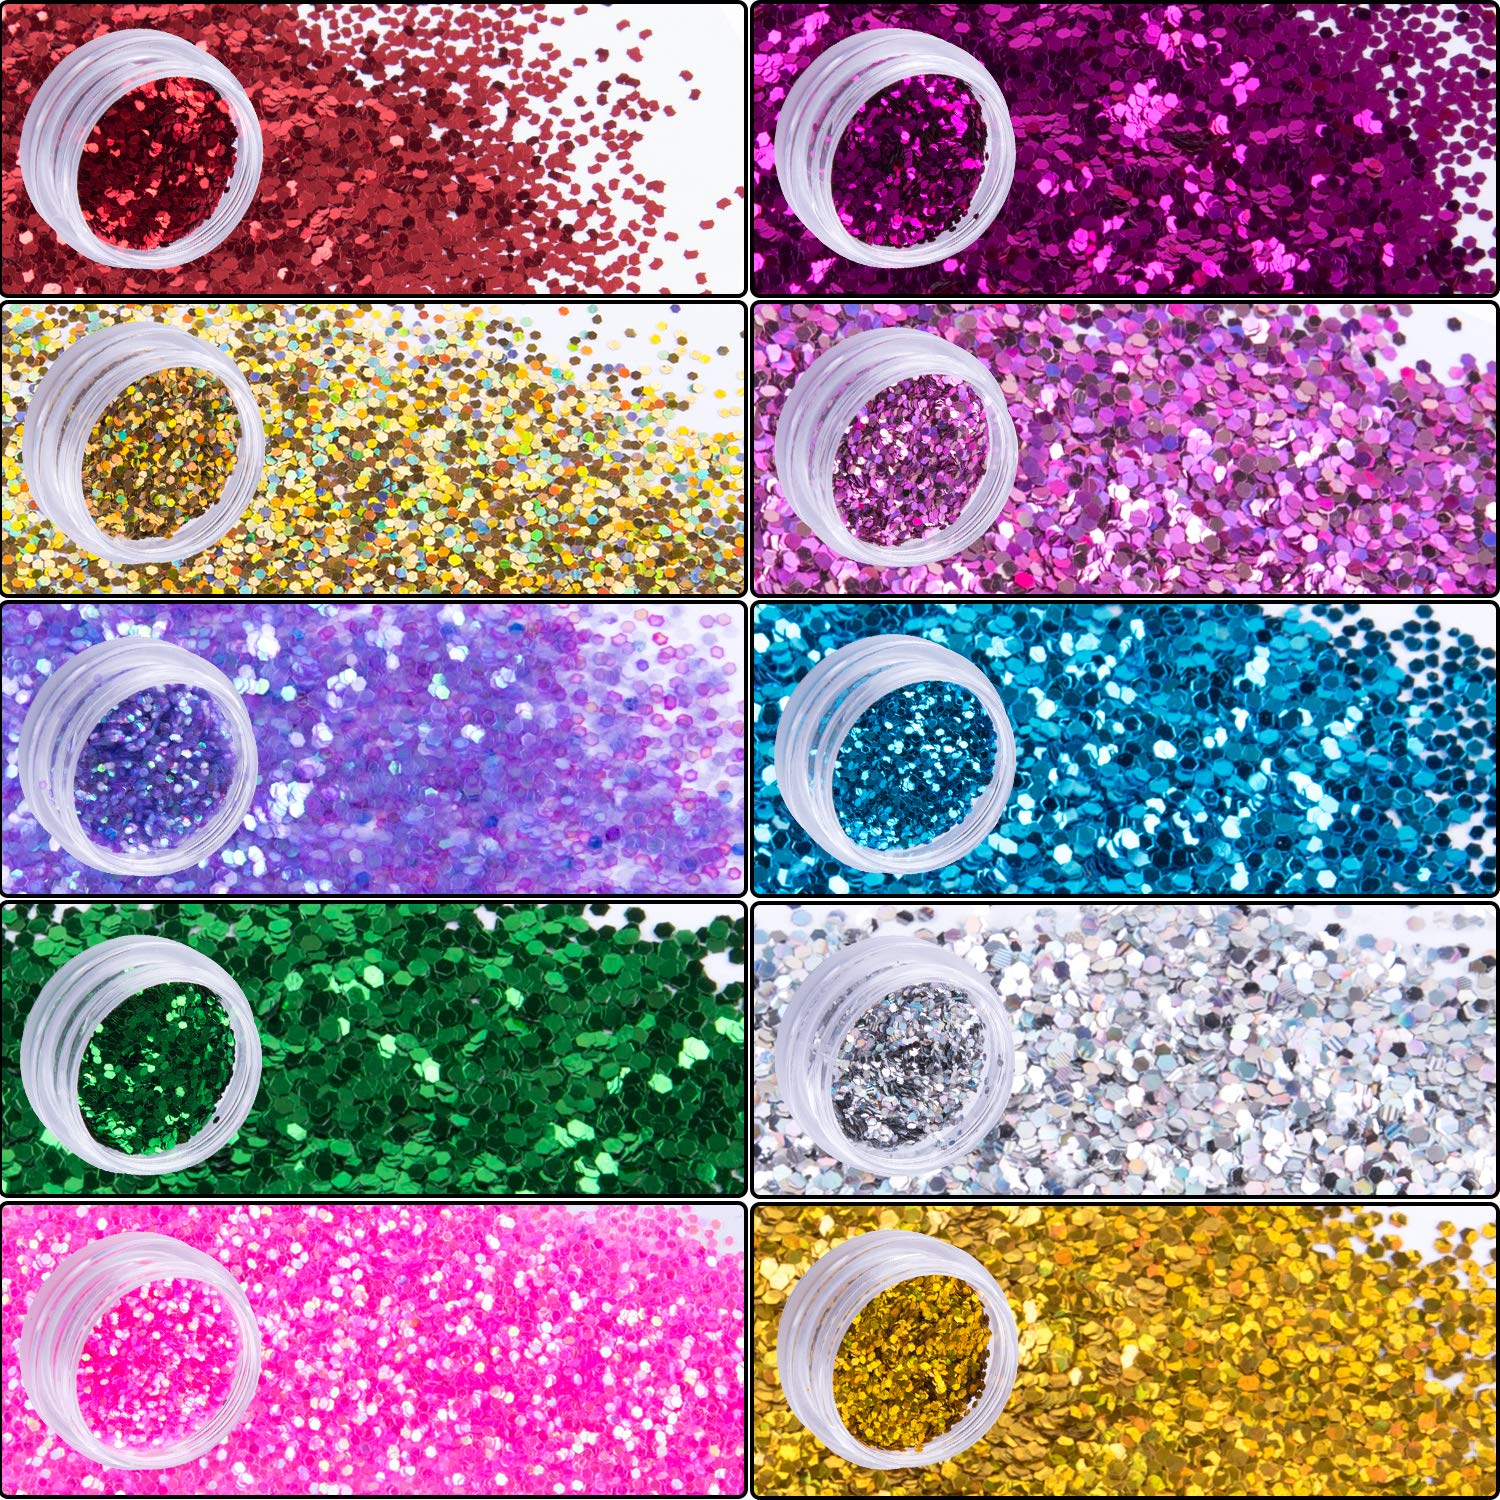 SIQUK 10 Sets Face Jewels Body Gems Stickers Mermaid Face Body Jewels Crystal Stickers with 10 Boxes Chunky Face Glitter for Festival Rave Party